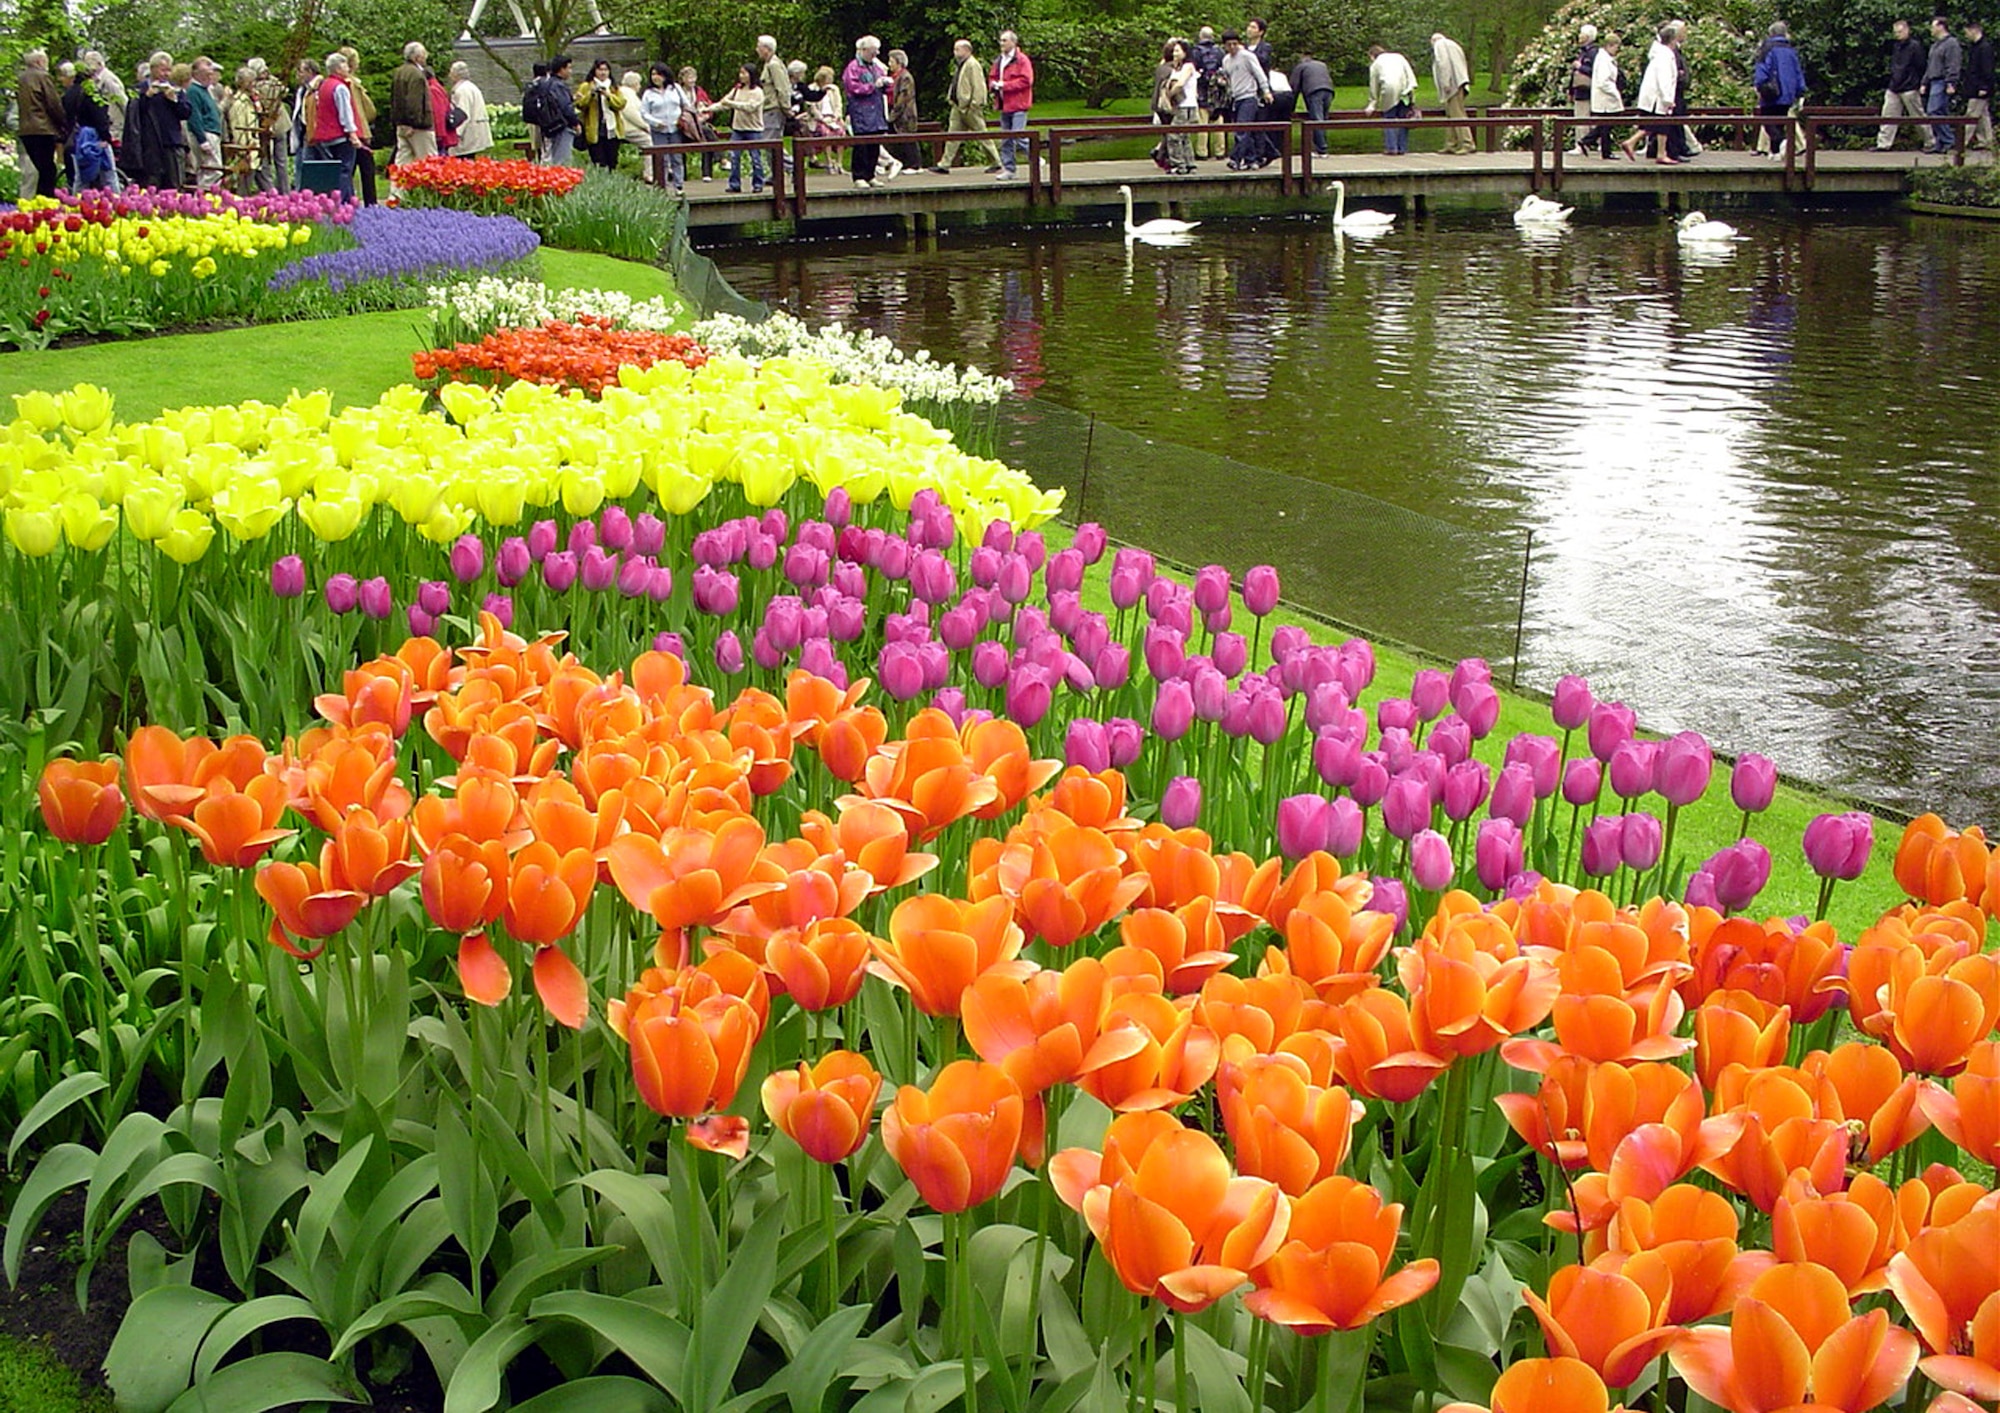 KEUKENHOF, Holland - The park has many different kinds of flowers and theme gardens in which flower bulbs play the lead role -- Abstract, Scent, Color, Renaissance, Style, Border and Rockery-Shadow-Water. Every year a number of artists are selected to exhibit some 30 sculptures and other objects of art throughout the park. There are restaurants, sunny terraces and coffee shops available at the Keukenhof, as well as a huge parking lot. Keukenhof has a grand display of 500 different varieties of tulips, daffodils, hyacinths and other bulbs can be seen. An area of 7,000 square meters of greenhouses as a permanent and unique flower show, and a huge indoor spring garden staged throughout the duration of the exhibition are available. (Courtesy photo)